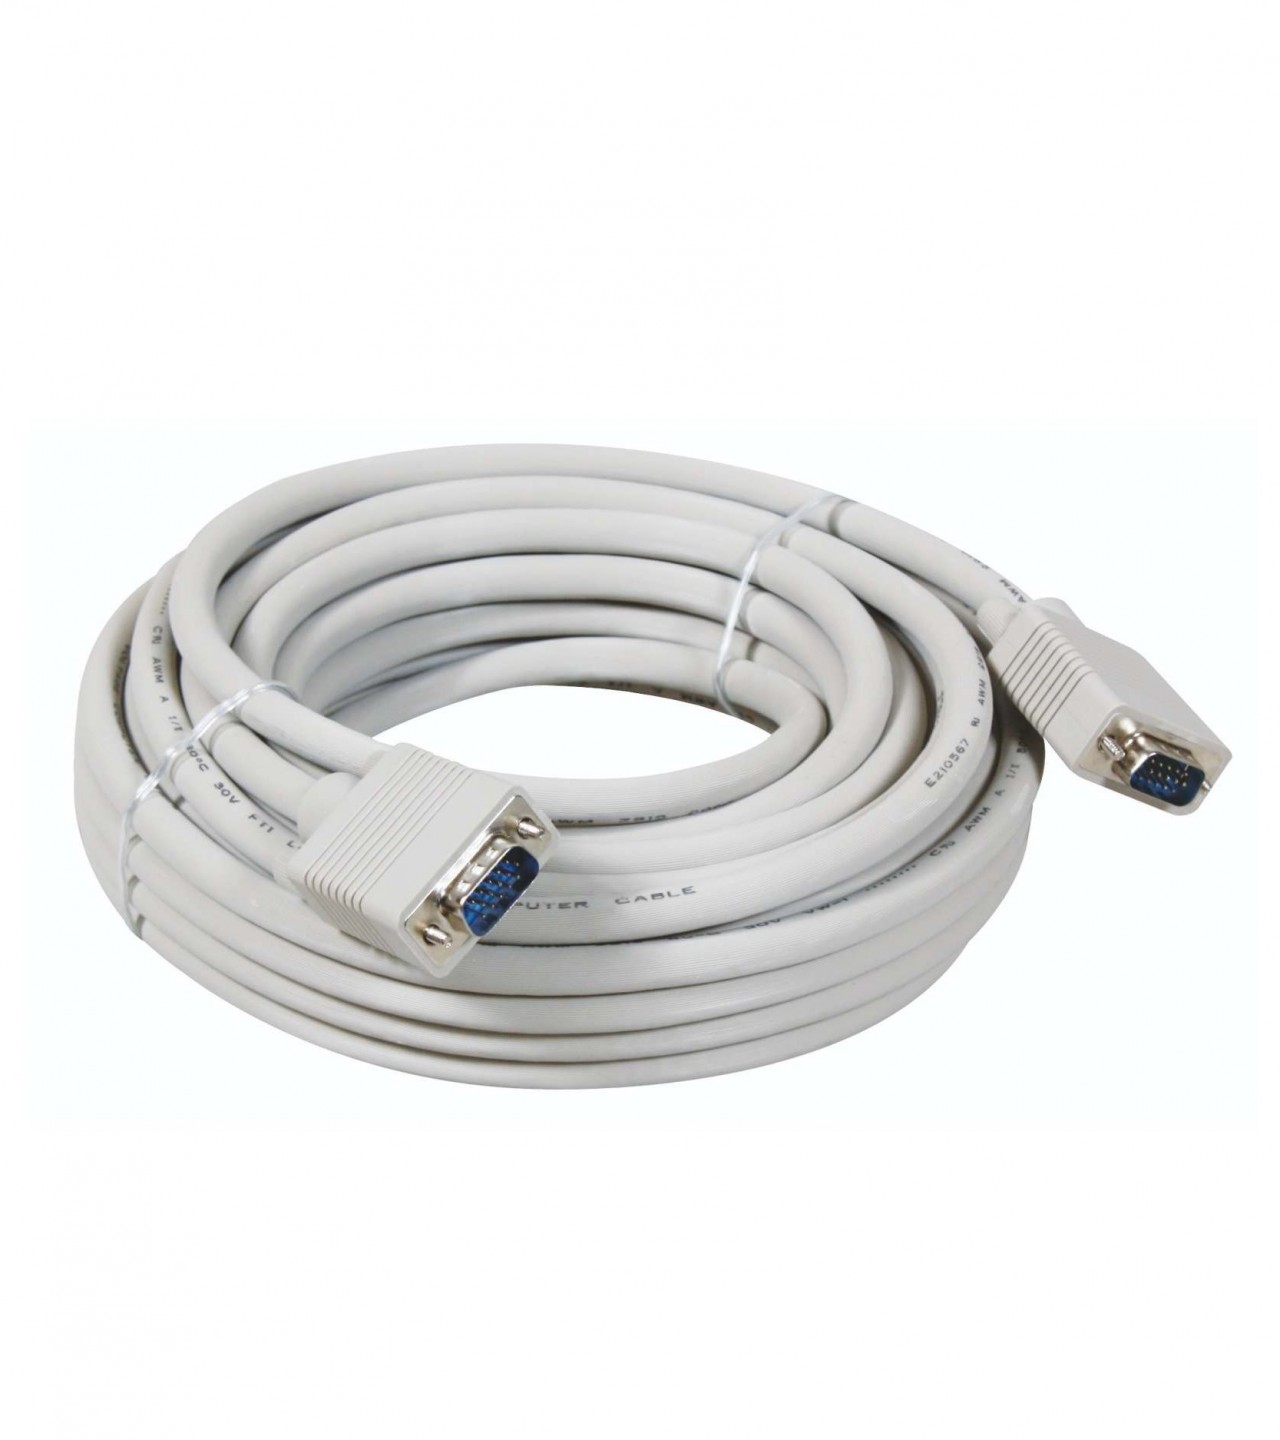 Vga Cable Male To Male OD 8MM 10m